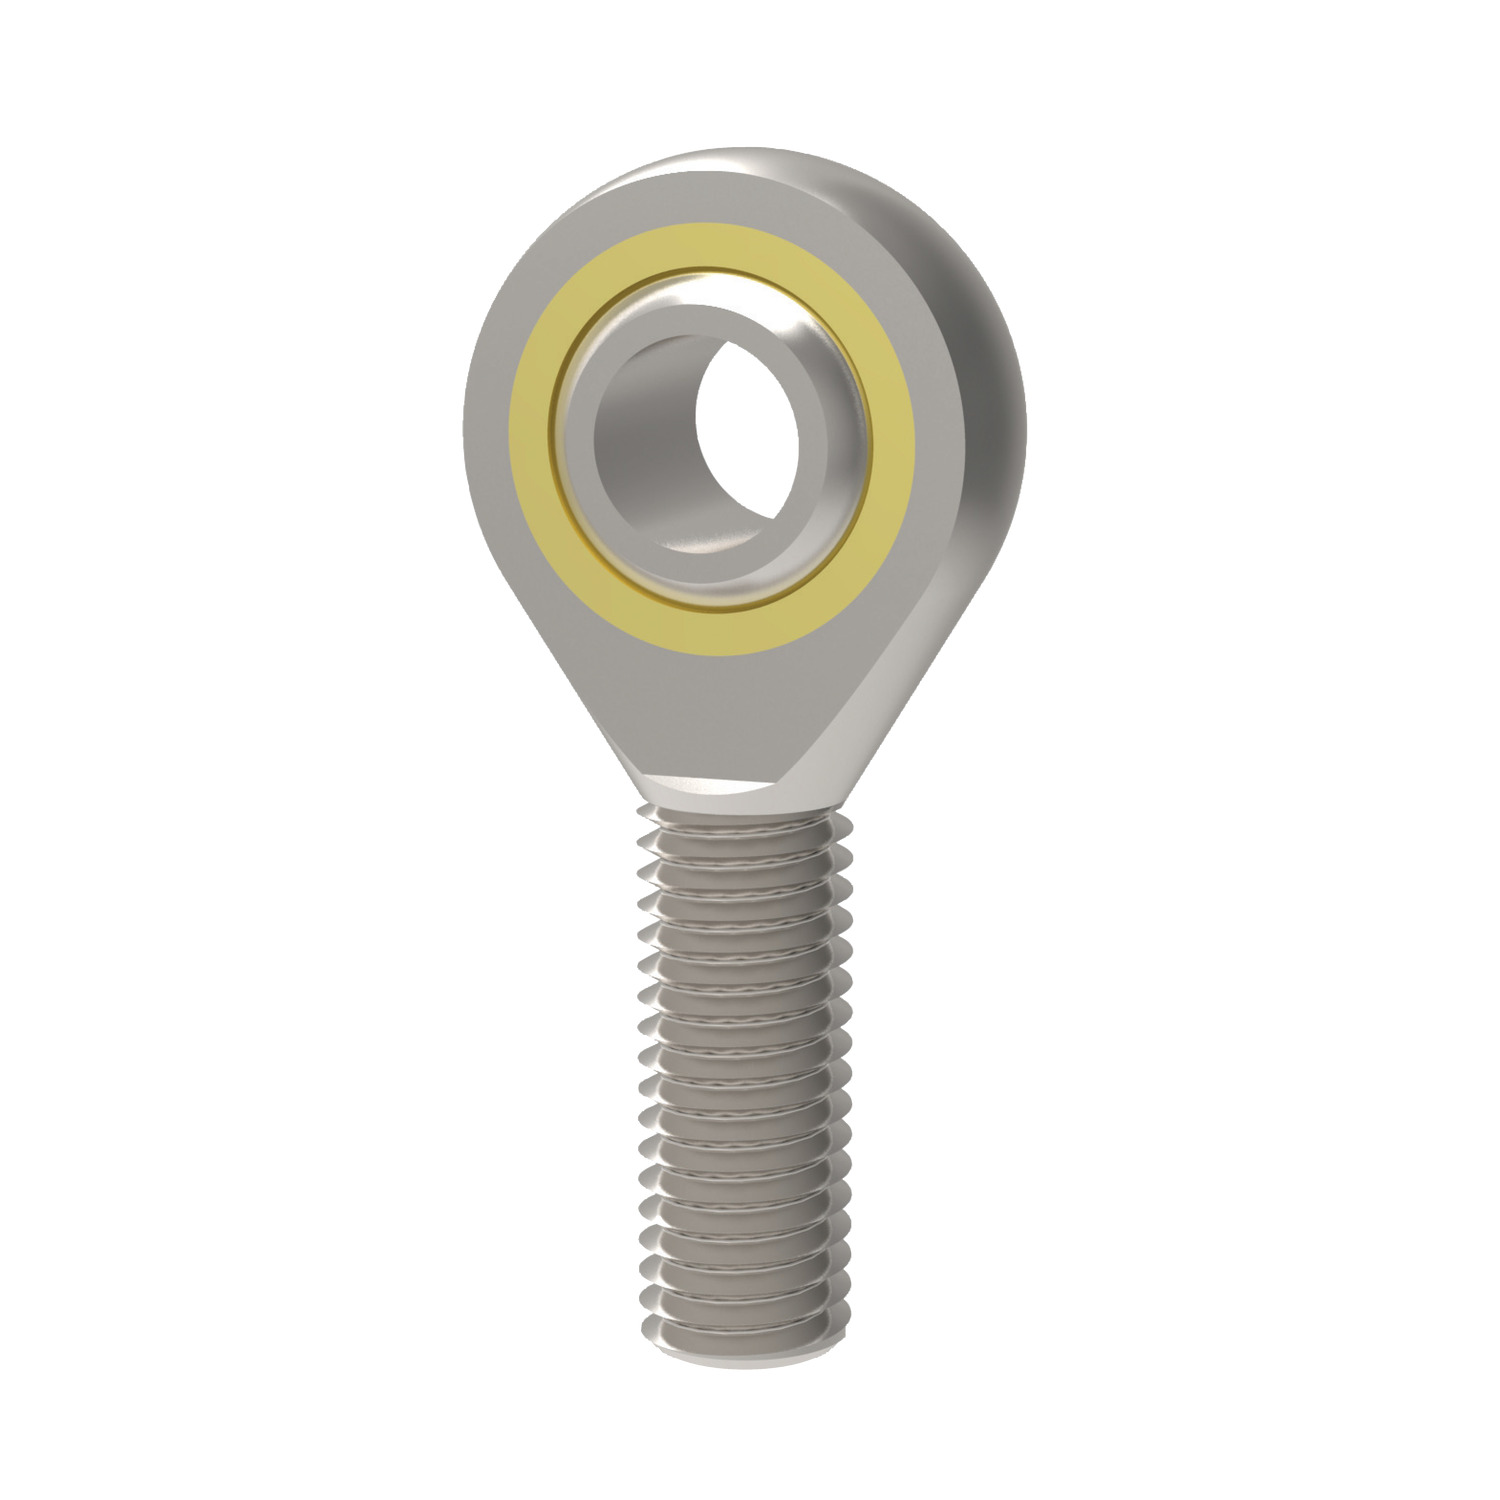 Stainless Low Cost Rod Ends Stainless steel female rod end from our Economy range. Also available in zinc-plated steel (R3571).